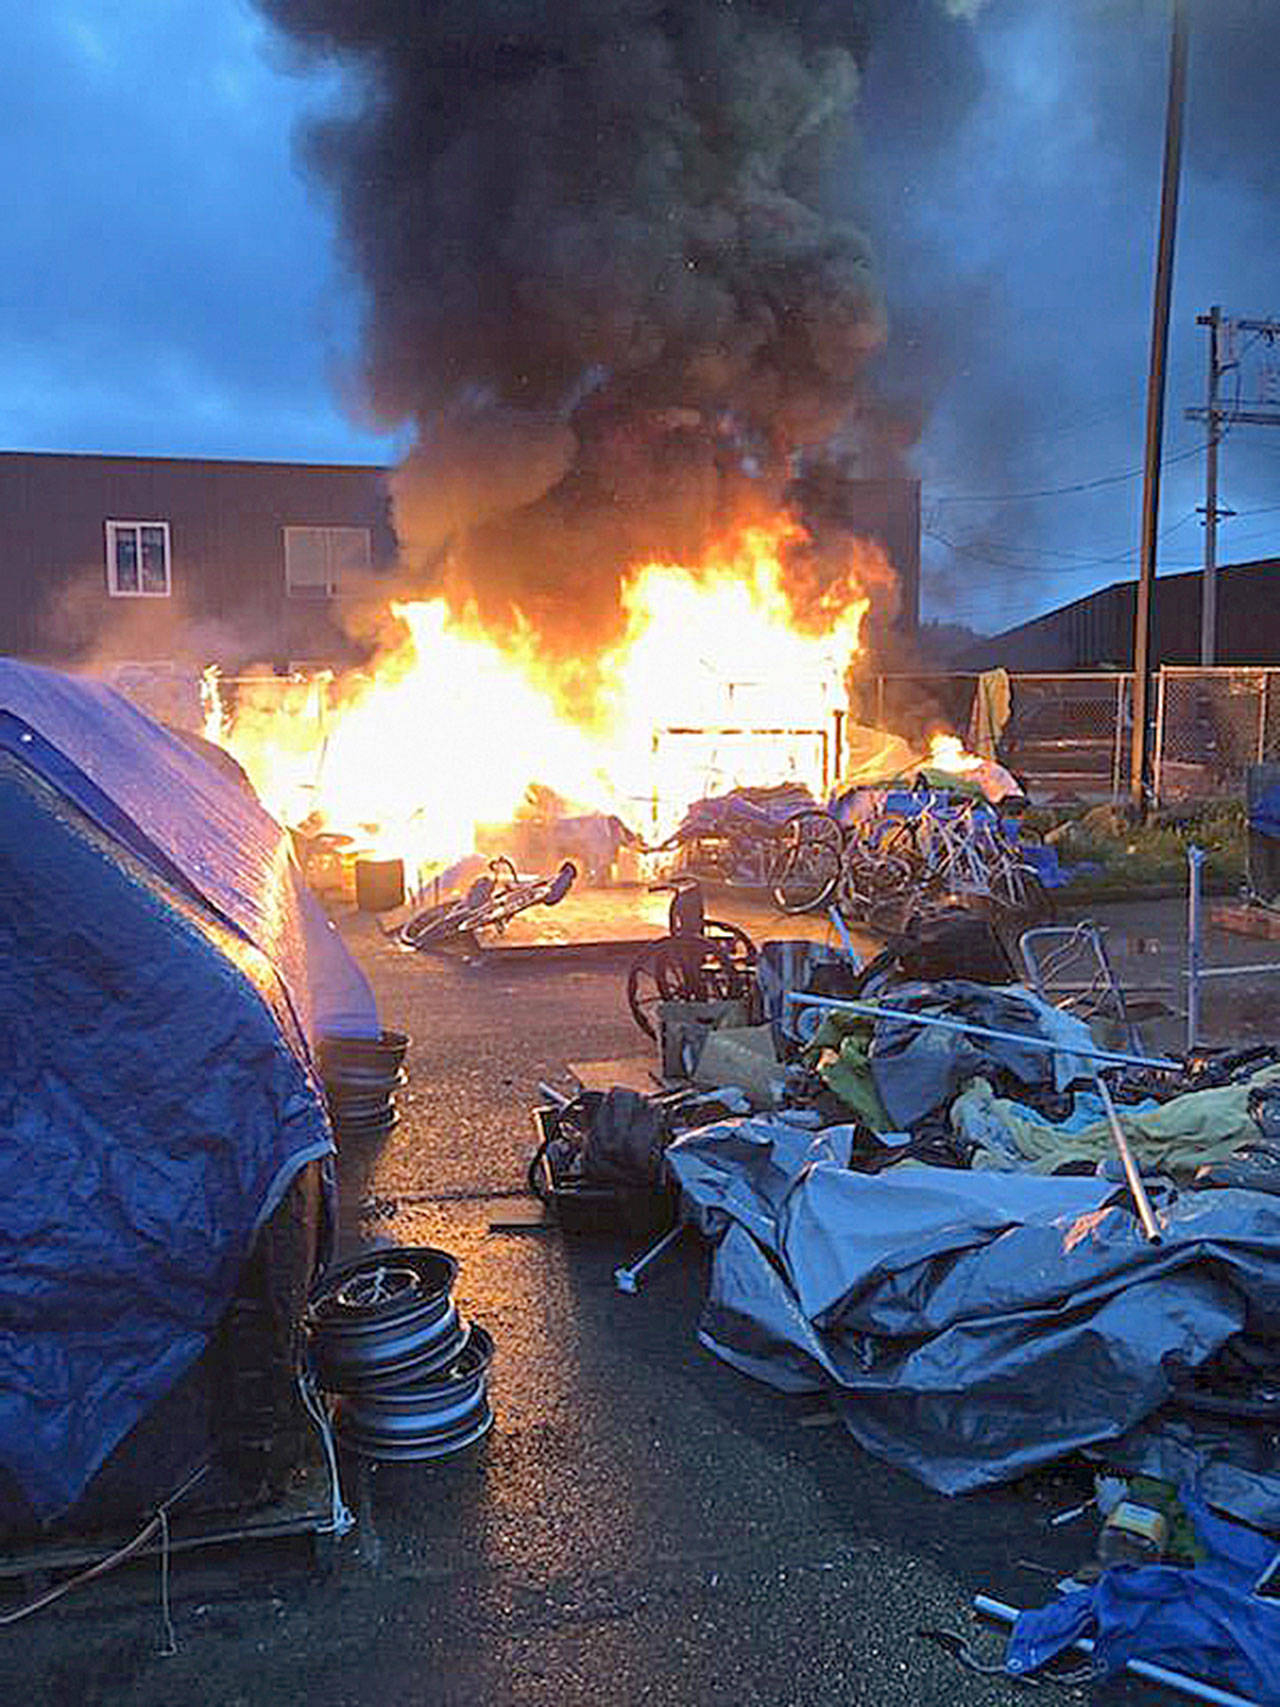 COURTESY ABERDEEN FIRE DEPARTMENT
The Thursday morning fire at the Aberdeen homeless camp next to City Hall was contained to one tent, according to the Aberdeen Fire Department.